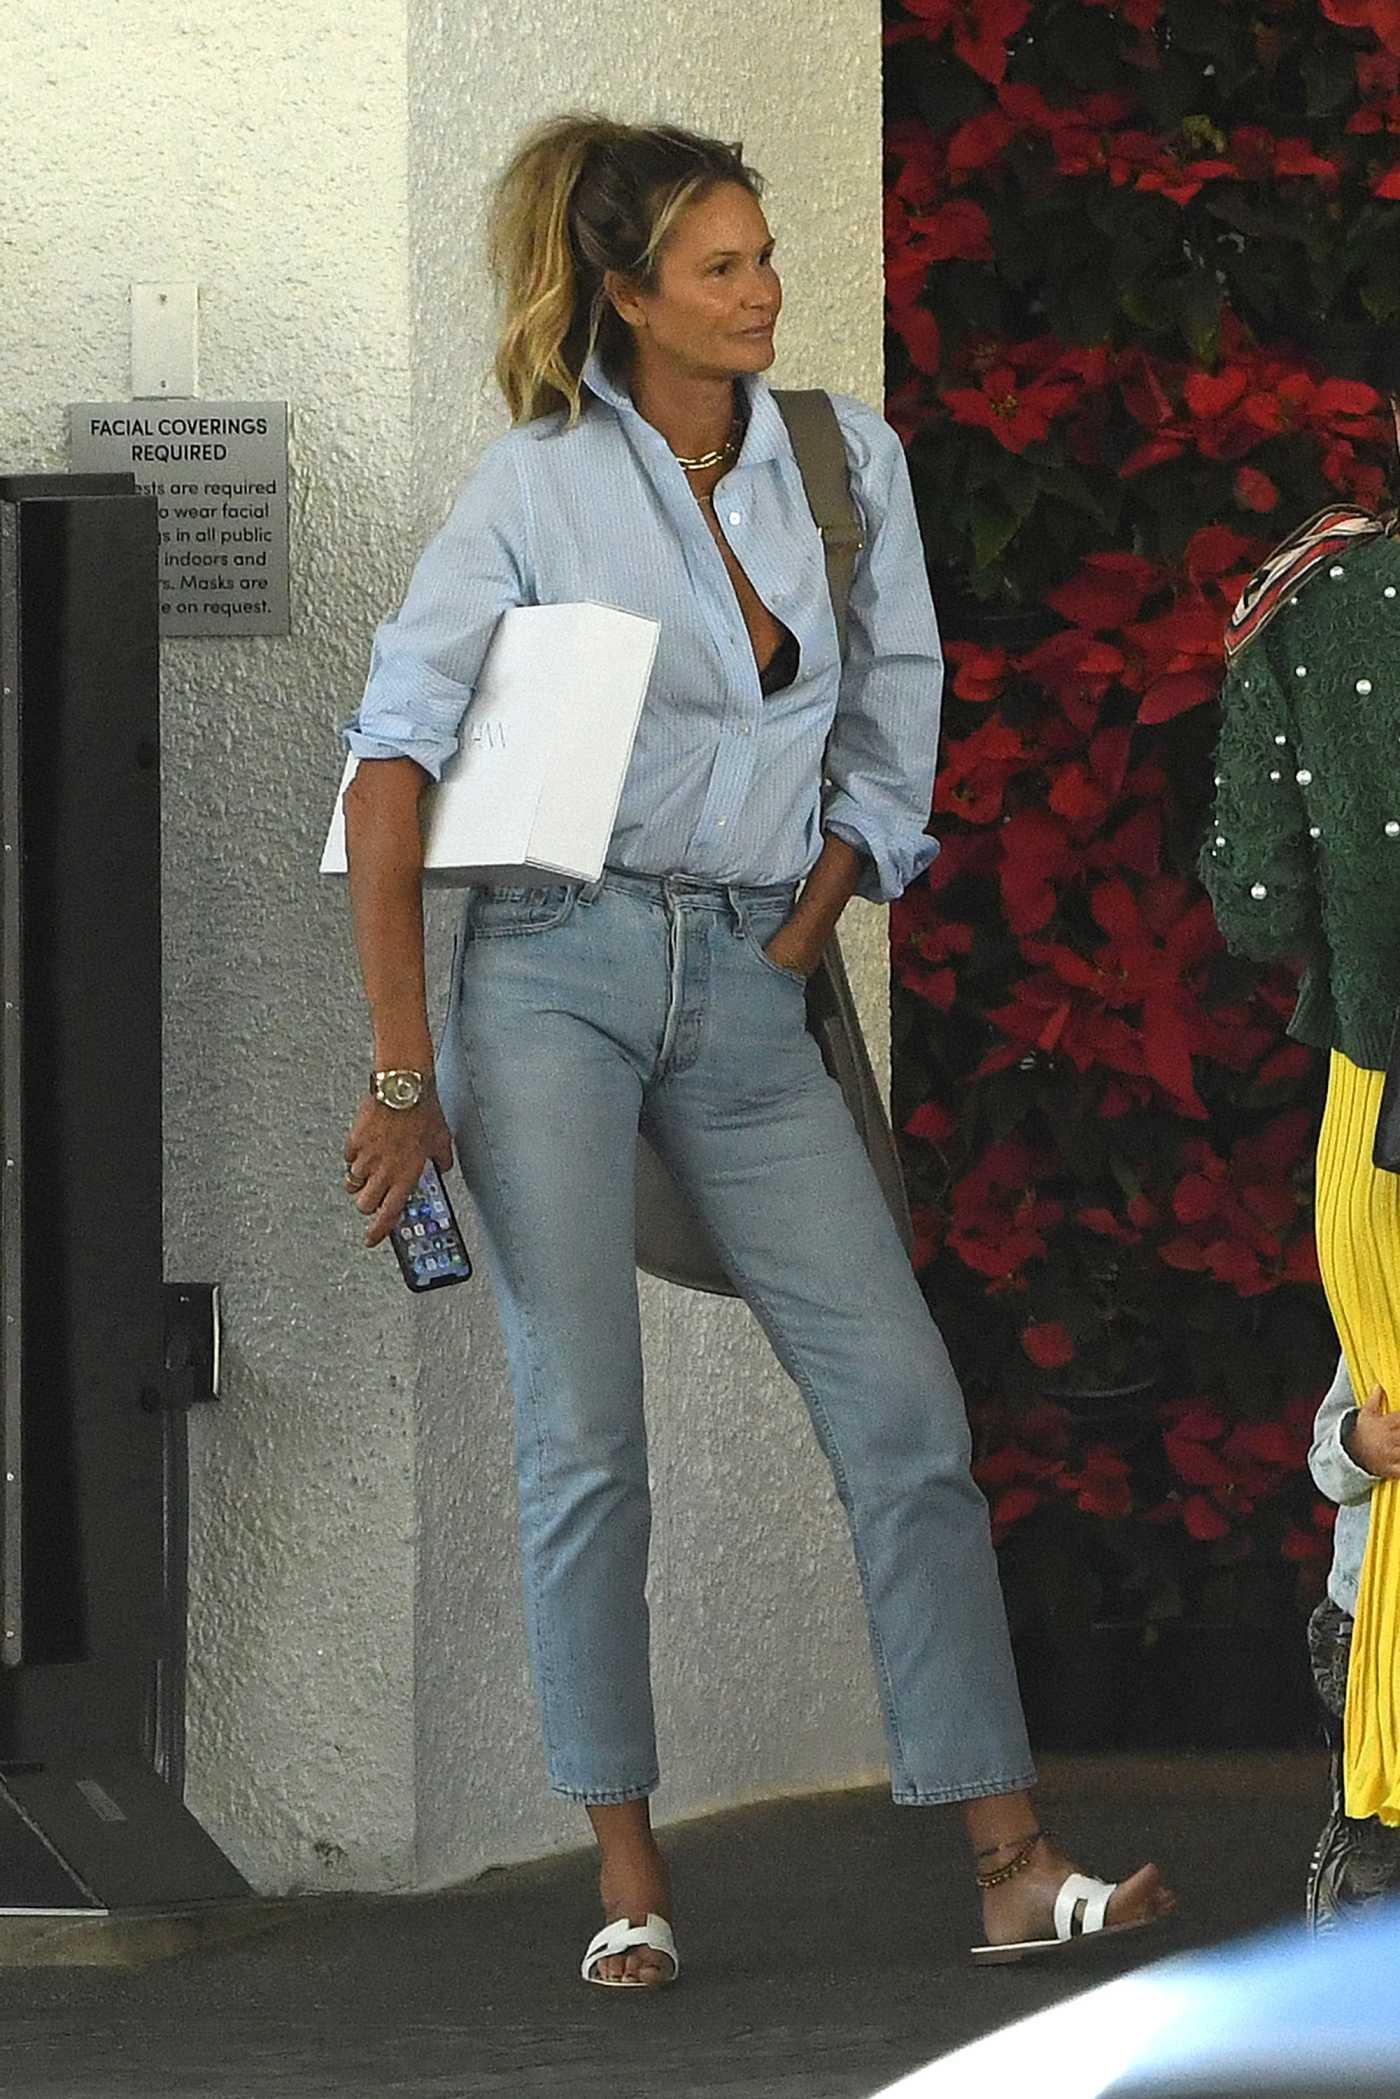 Elle Macpherson in a Striped Shirt Shopped at a Mall in Miami 12/19/2020